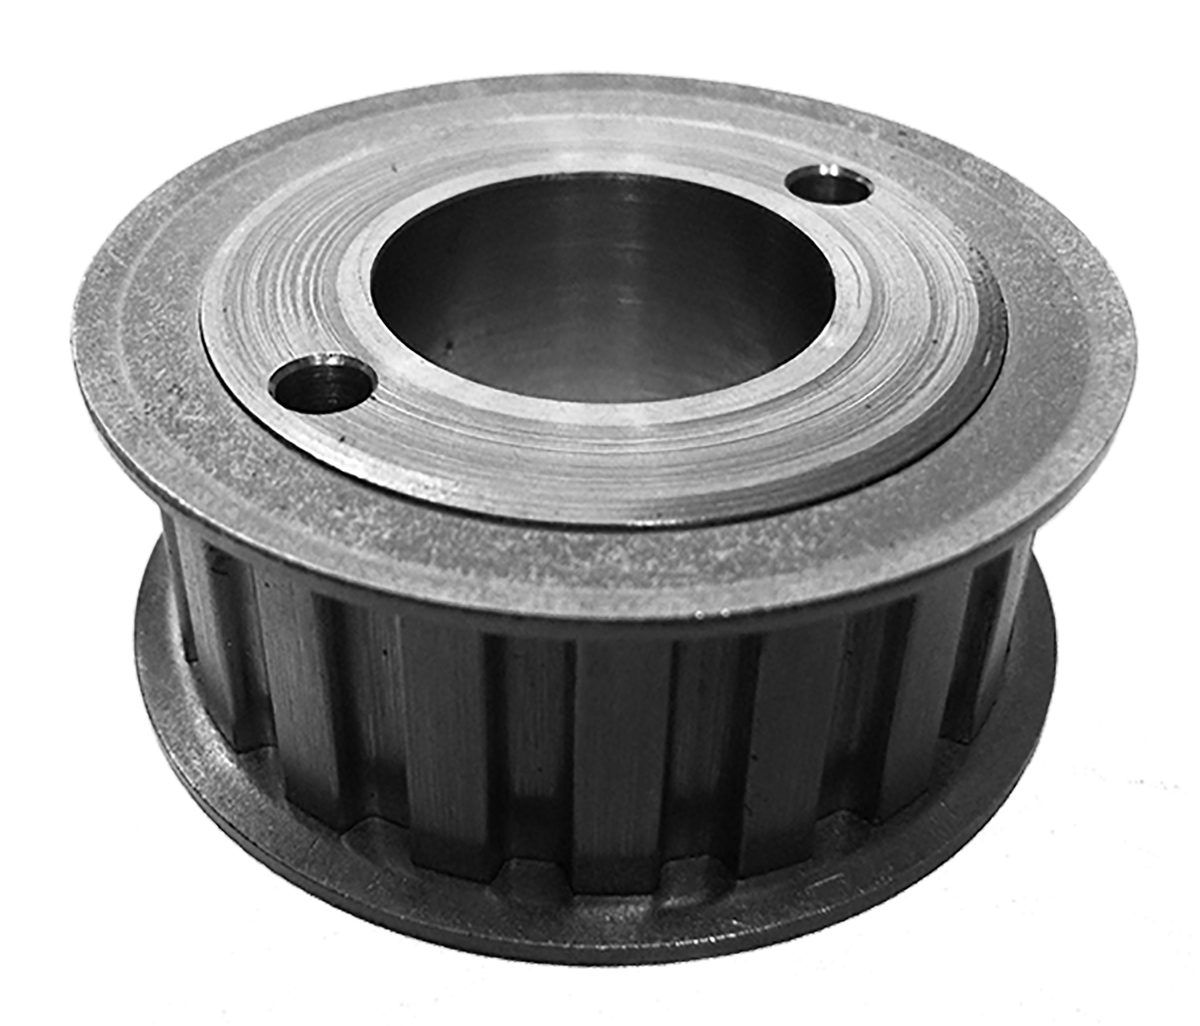 96LH075 - Cast Iron Imperial Pitch Pulleys